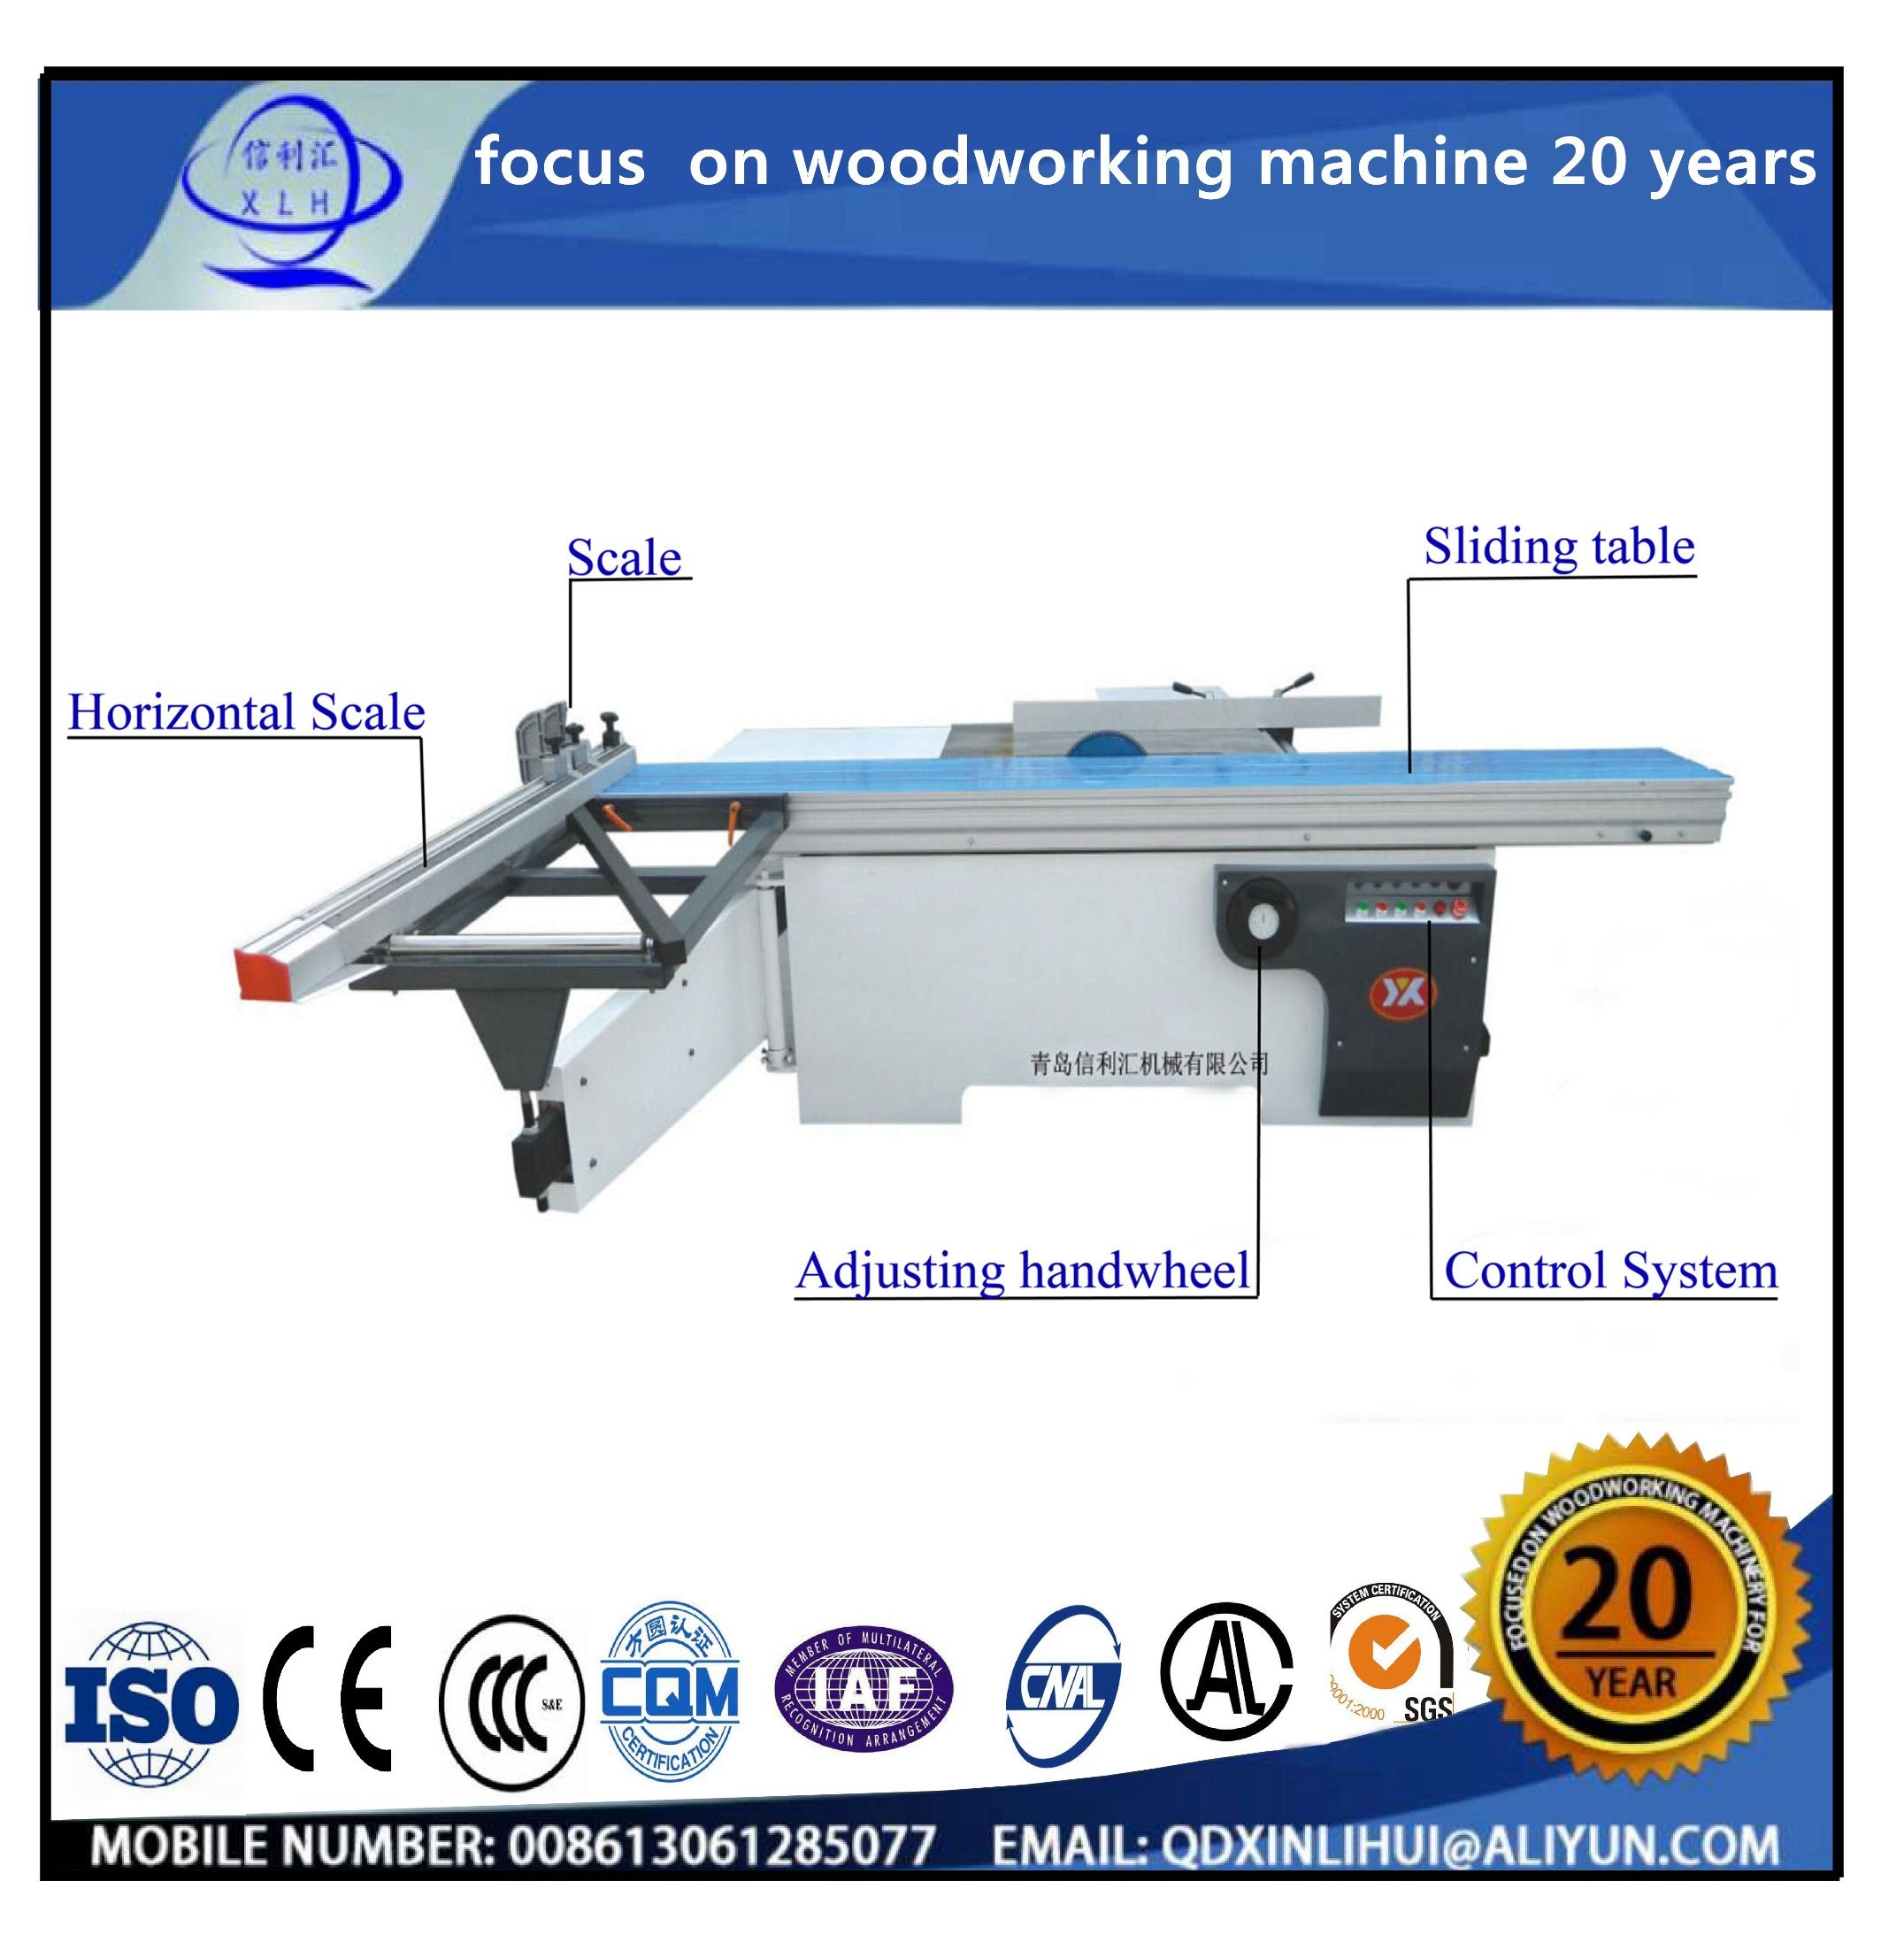 Electrical Control Precise Panel Saw CNC Table Saw